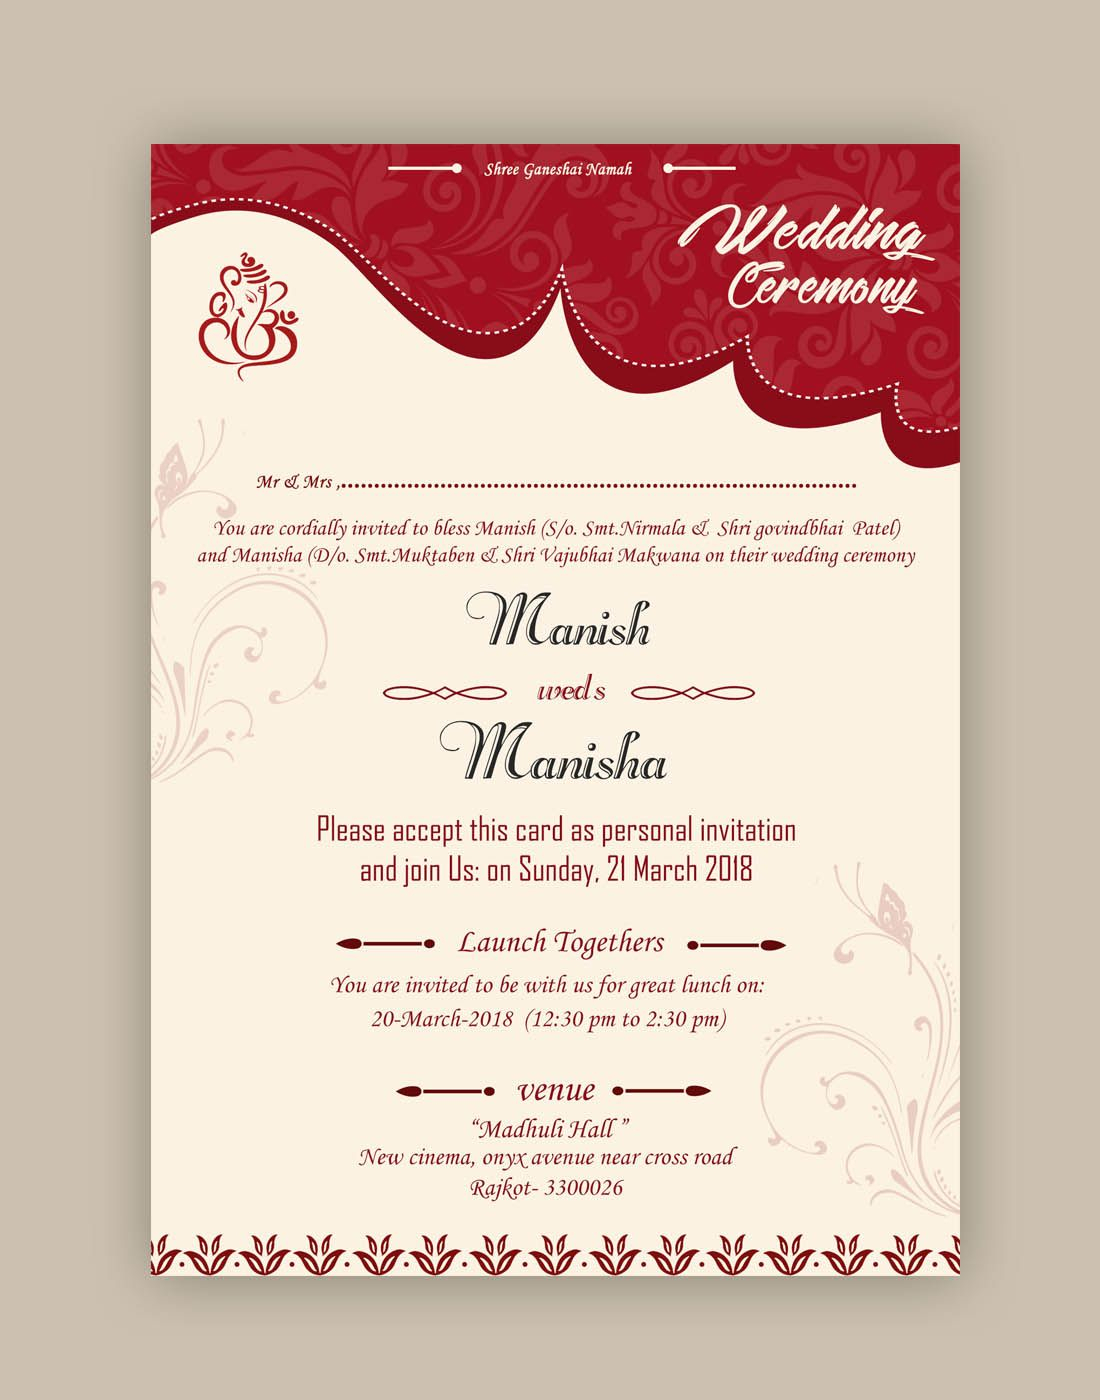 Free Wedding Card Psd Templates In 2020 | Marriage Cards For Free E Wedding Invitation Card Templates